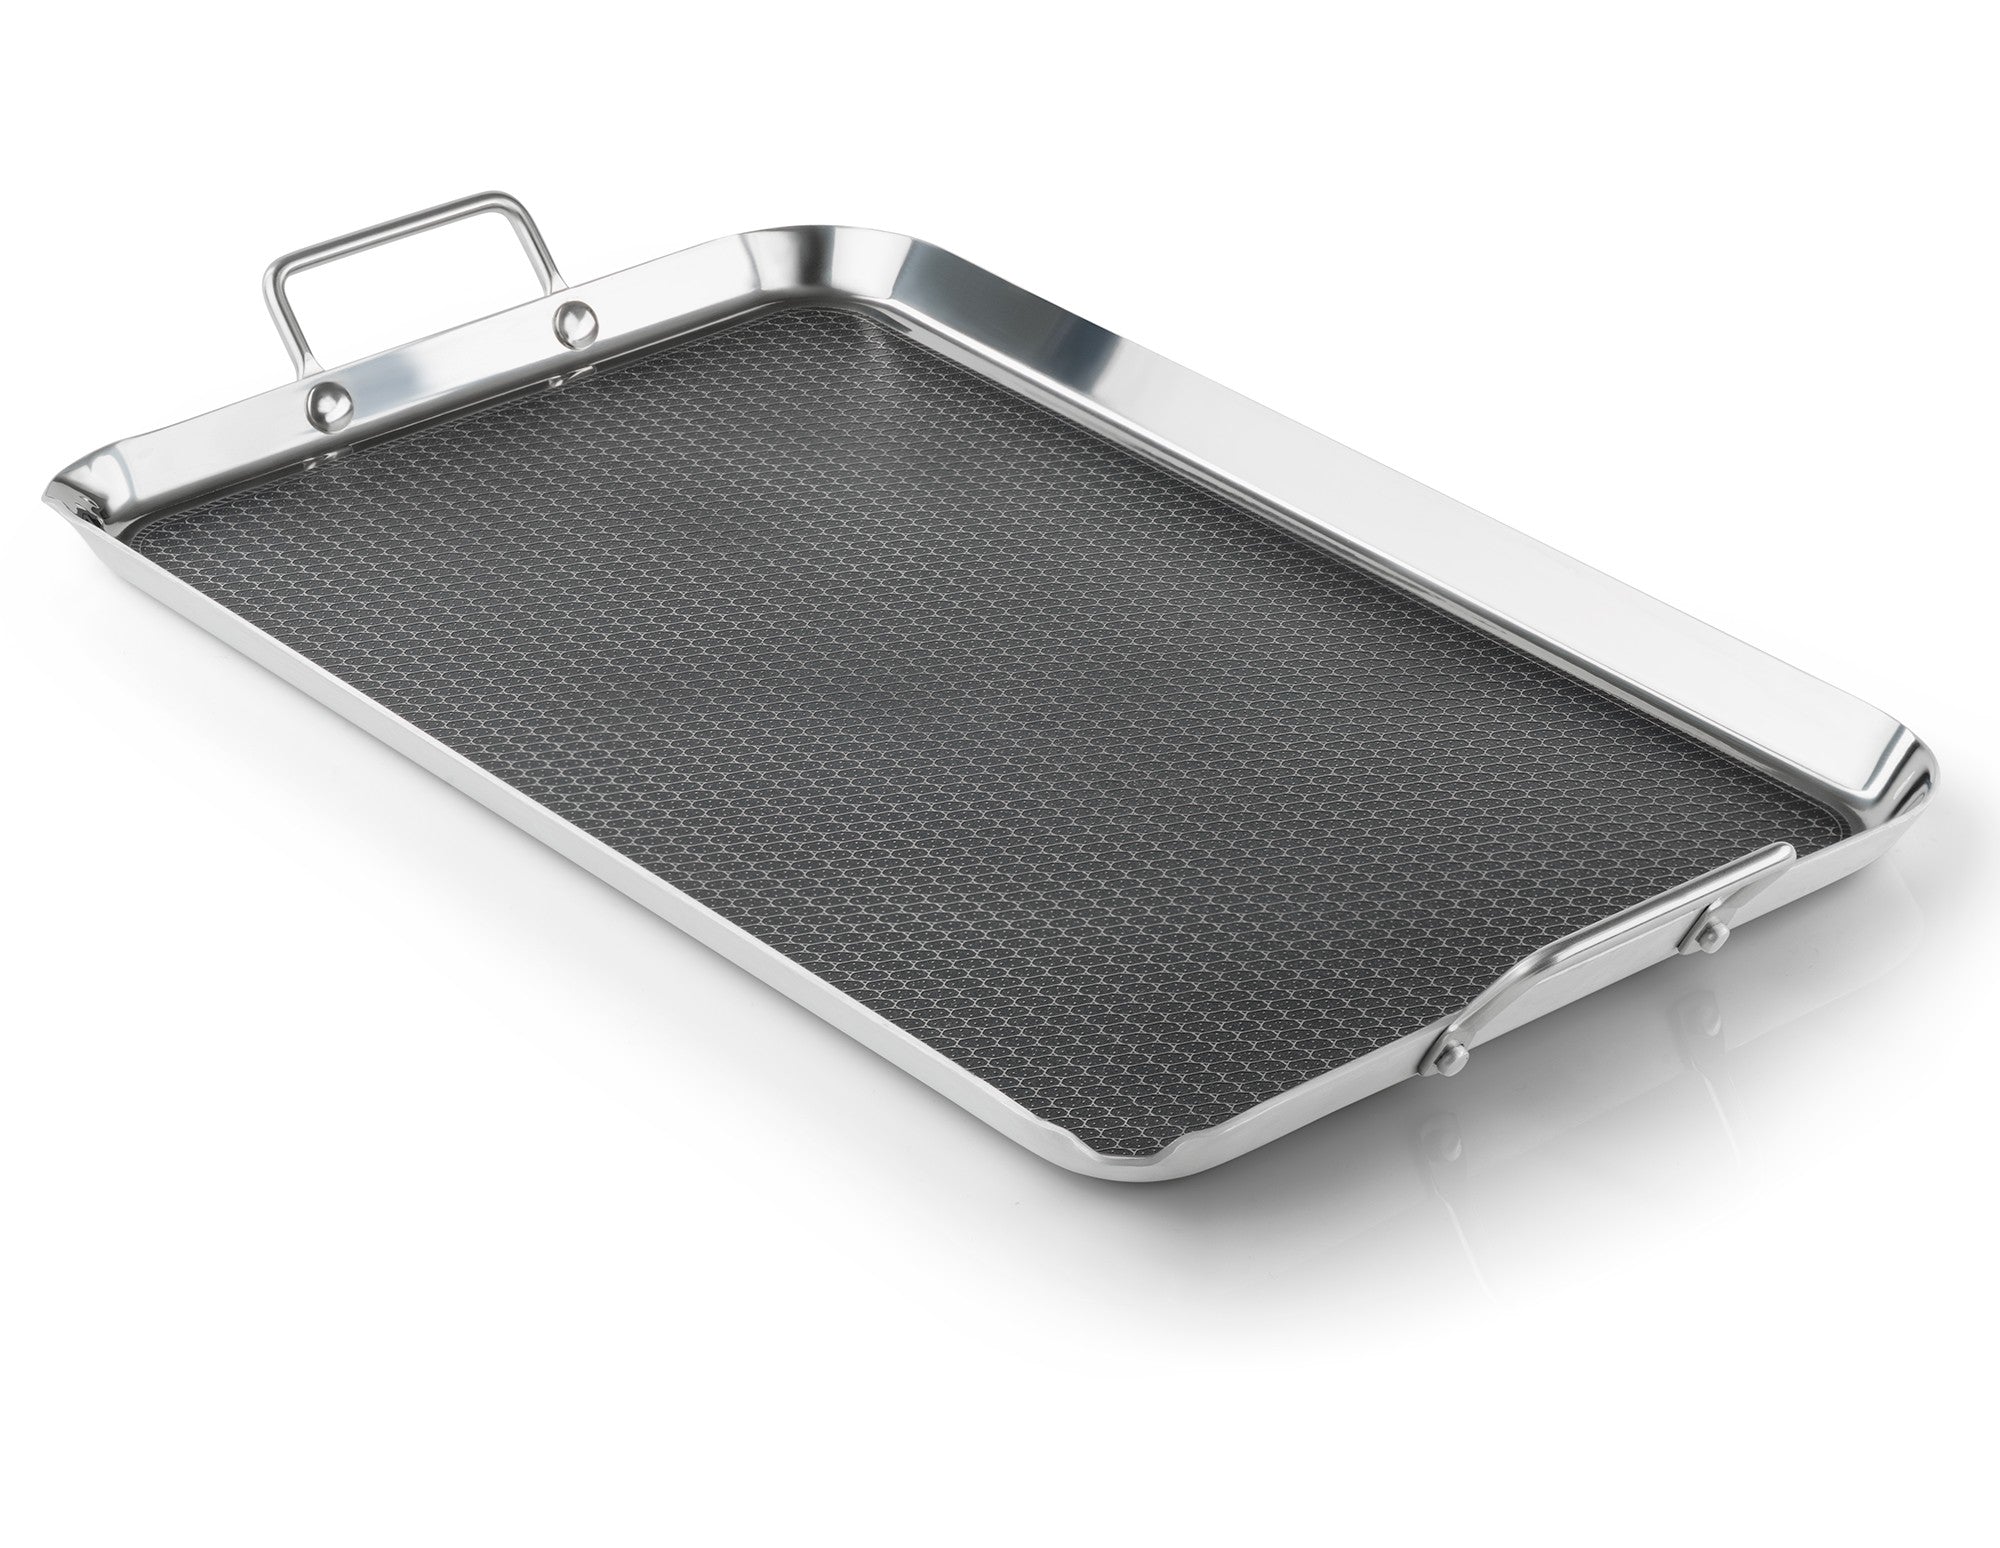 Gourmet Non-Stick Camping Griddle, Camp Cookware GSI Outdoors